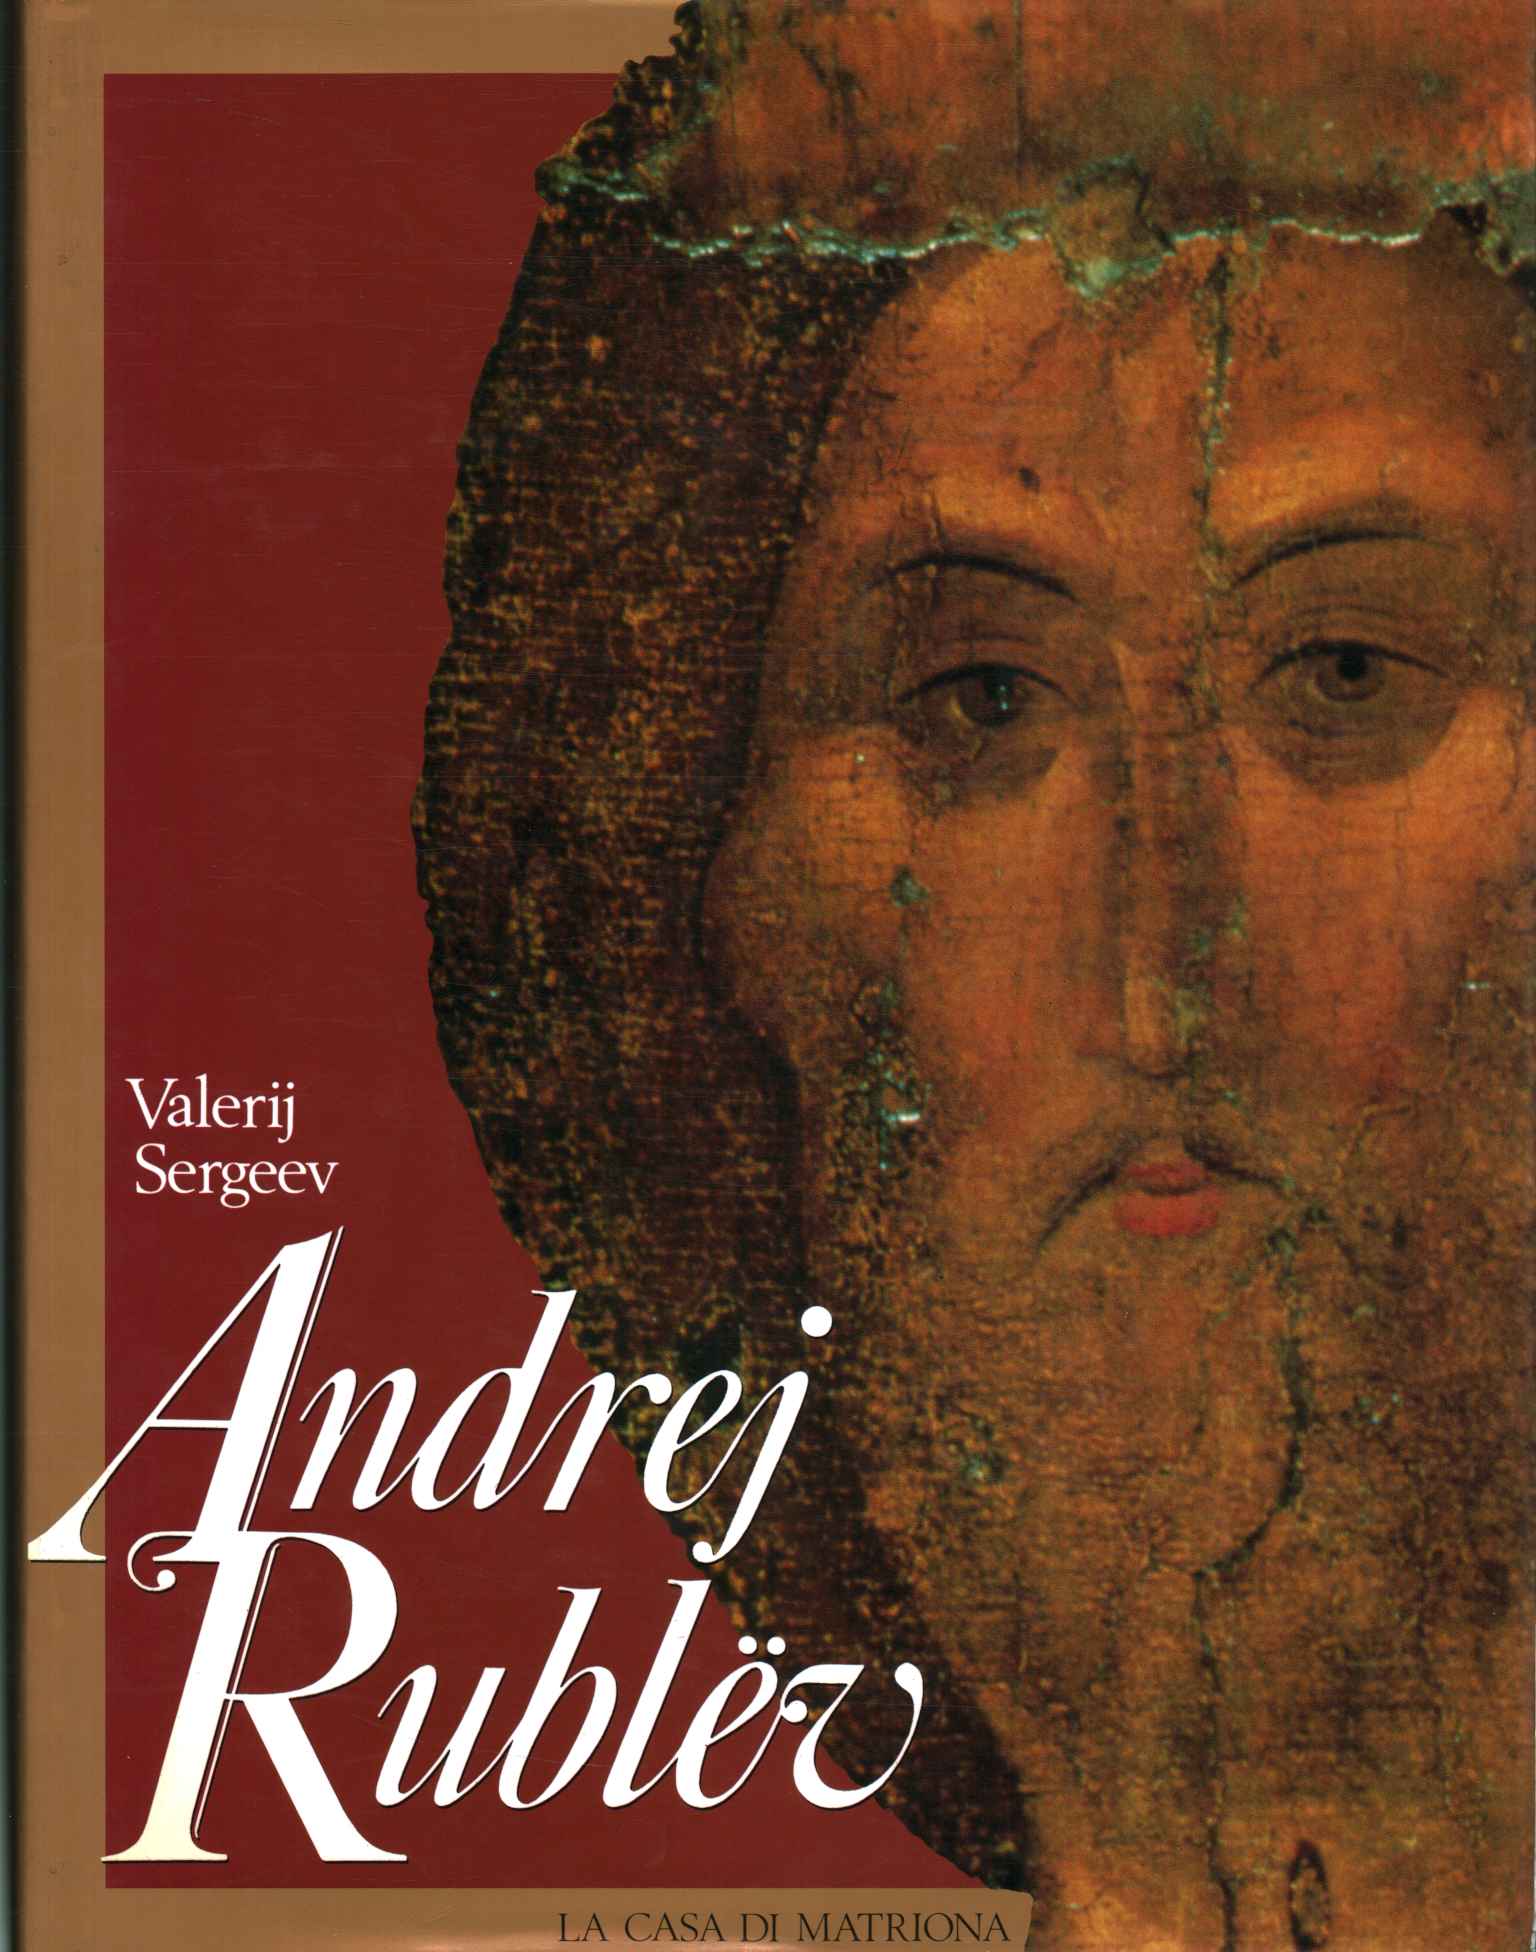 Andrei Rublev